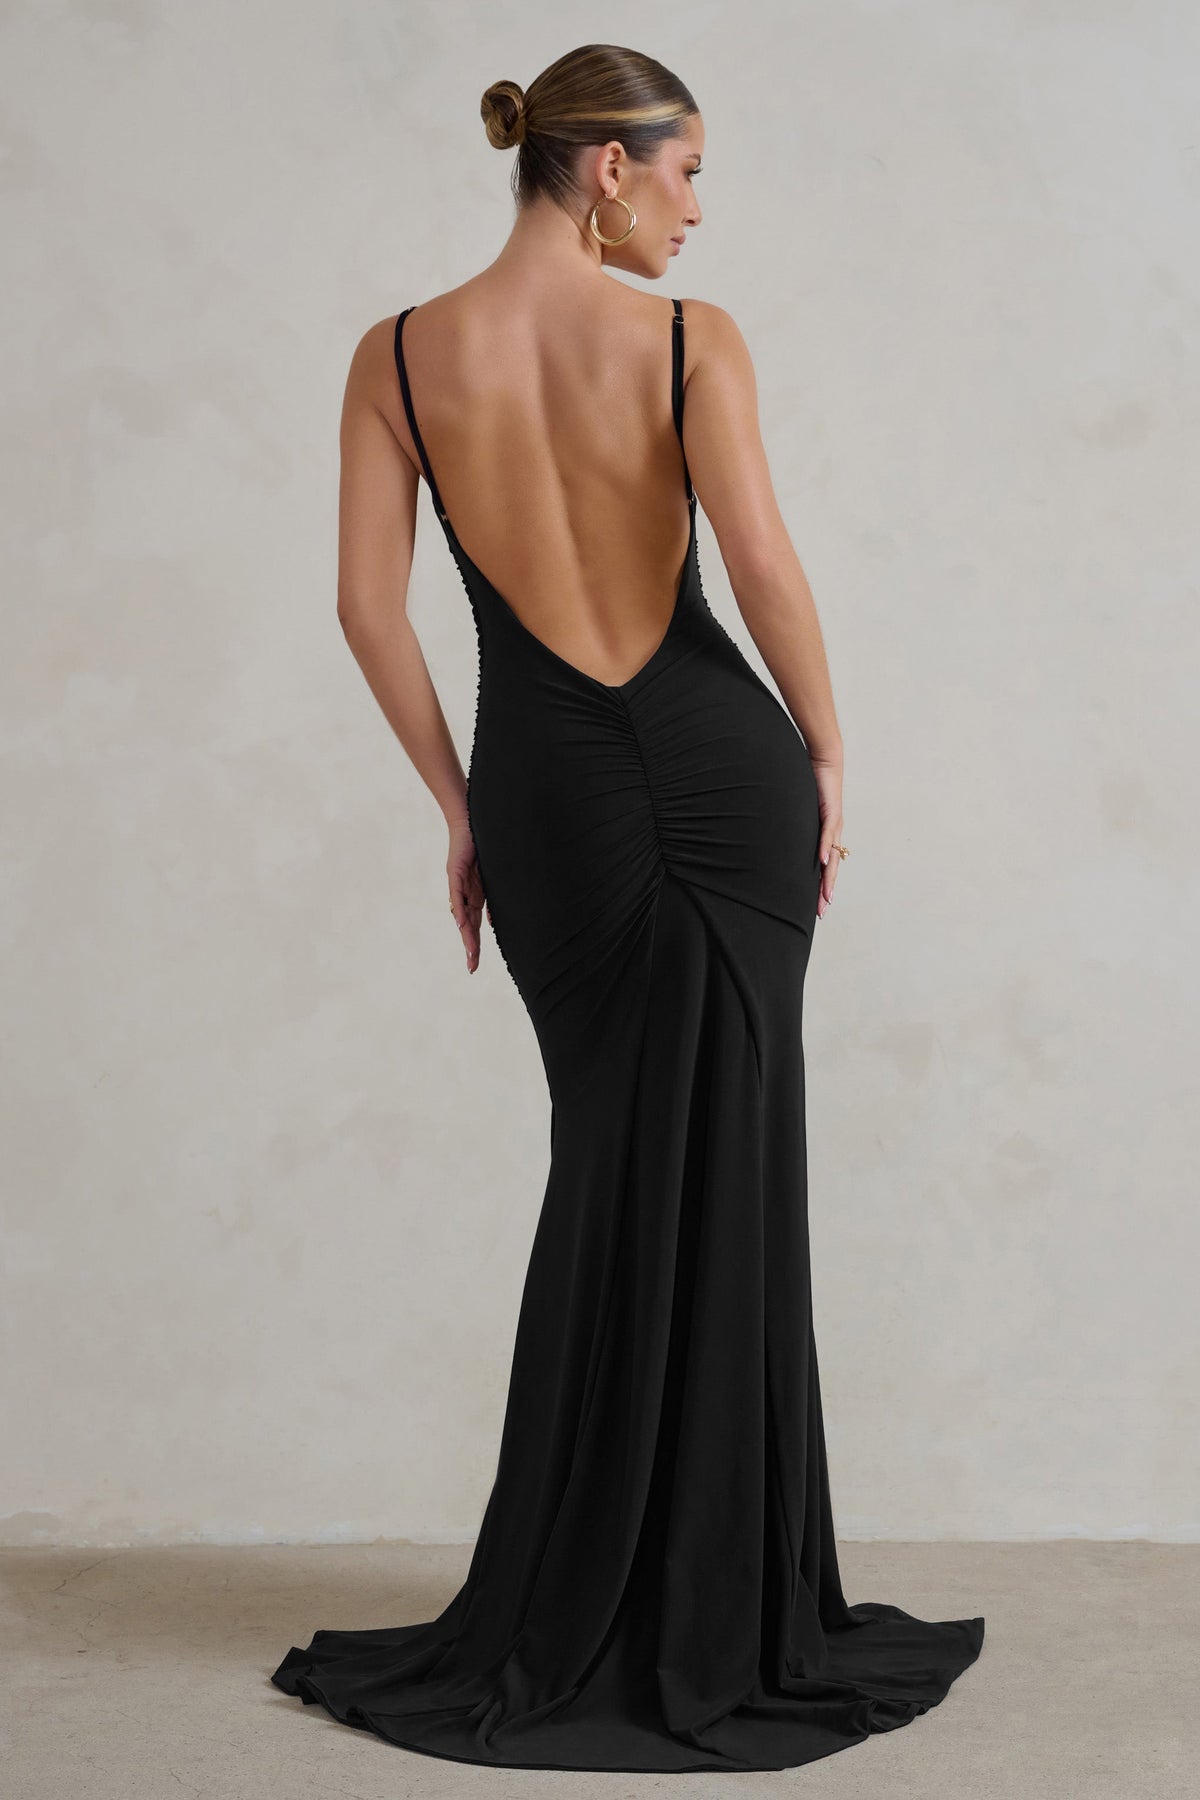 ASYOU cami maxi dress with high leg slit in black